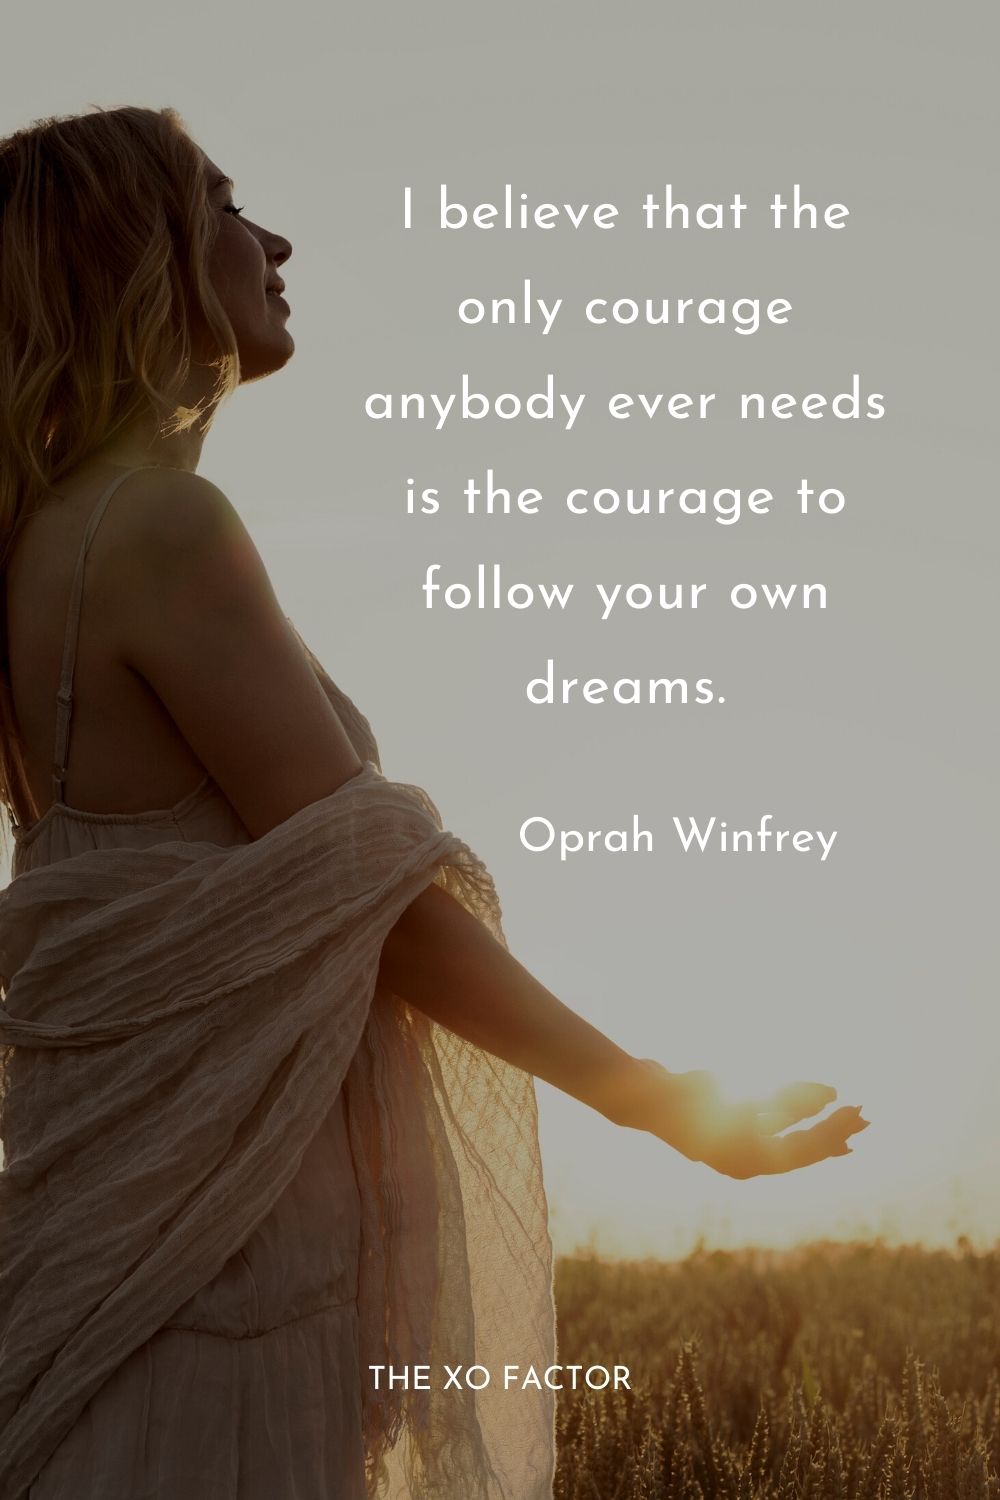 I believe that the only courage anybody ever needs is the courage to follow your own dreams.